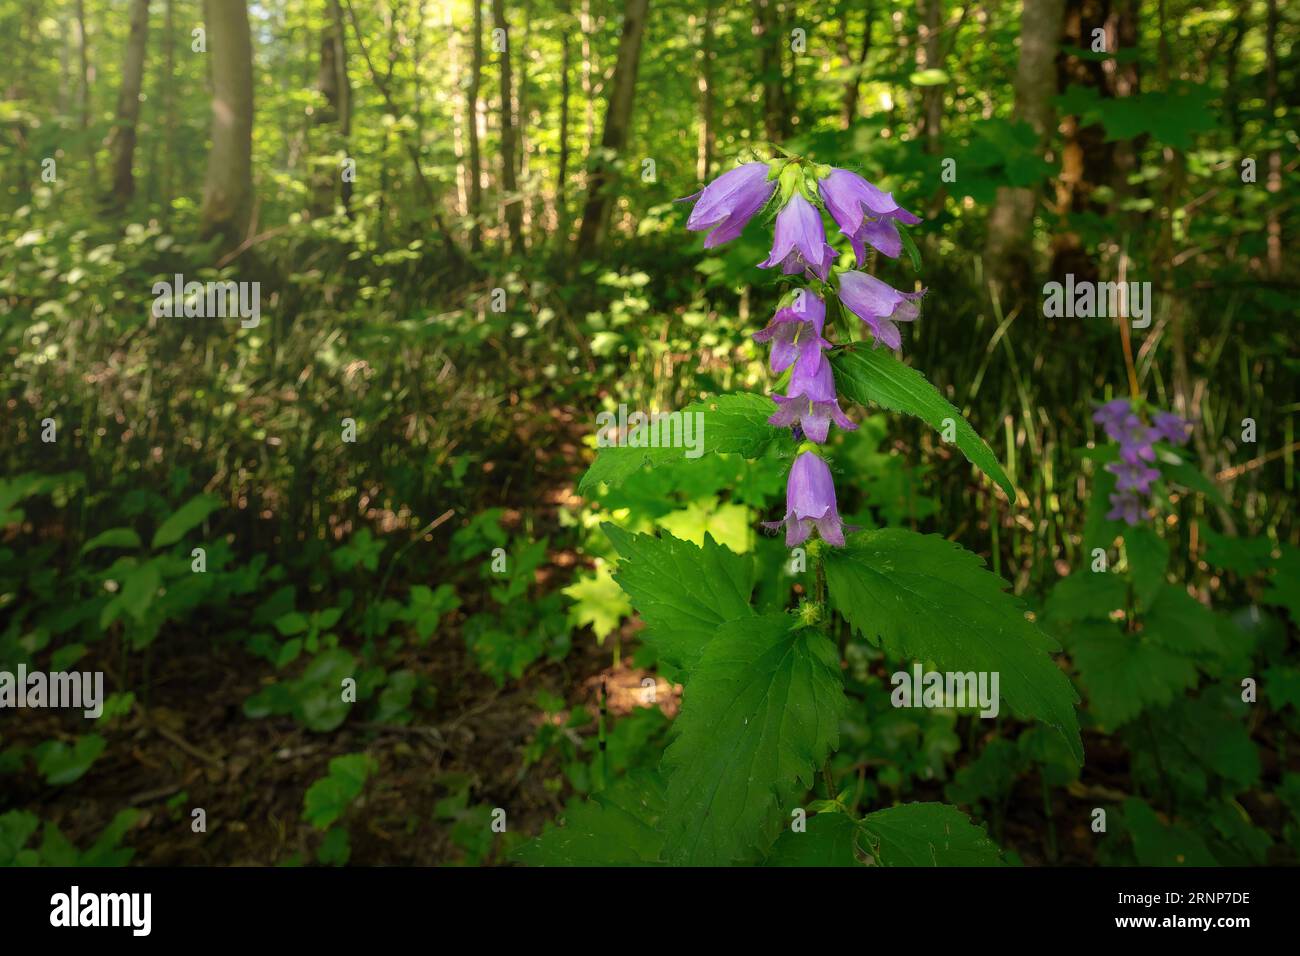 Beautiful Purple Bellflowers (Campanula) in a forest Stock Photo